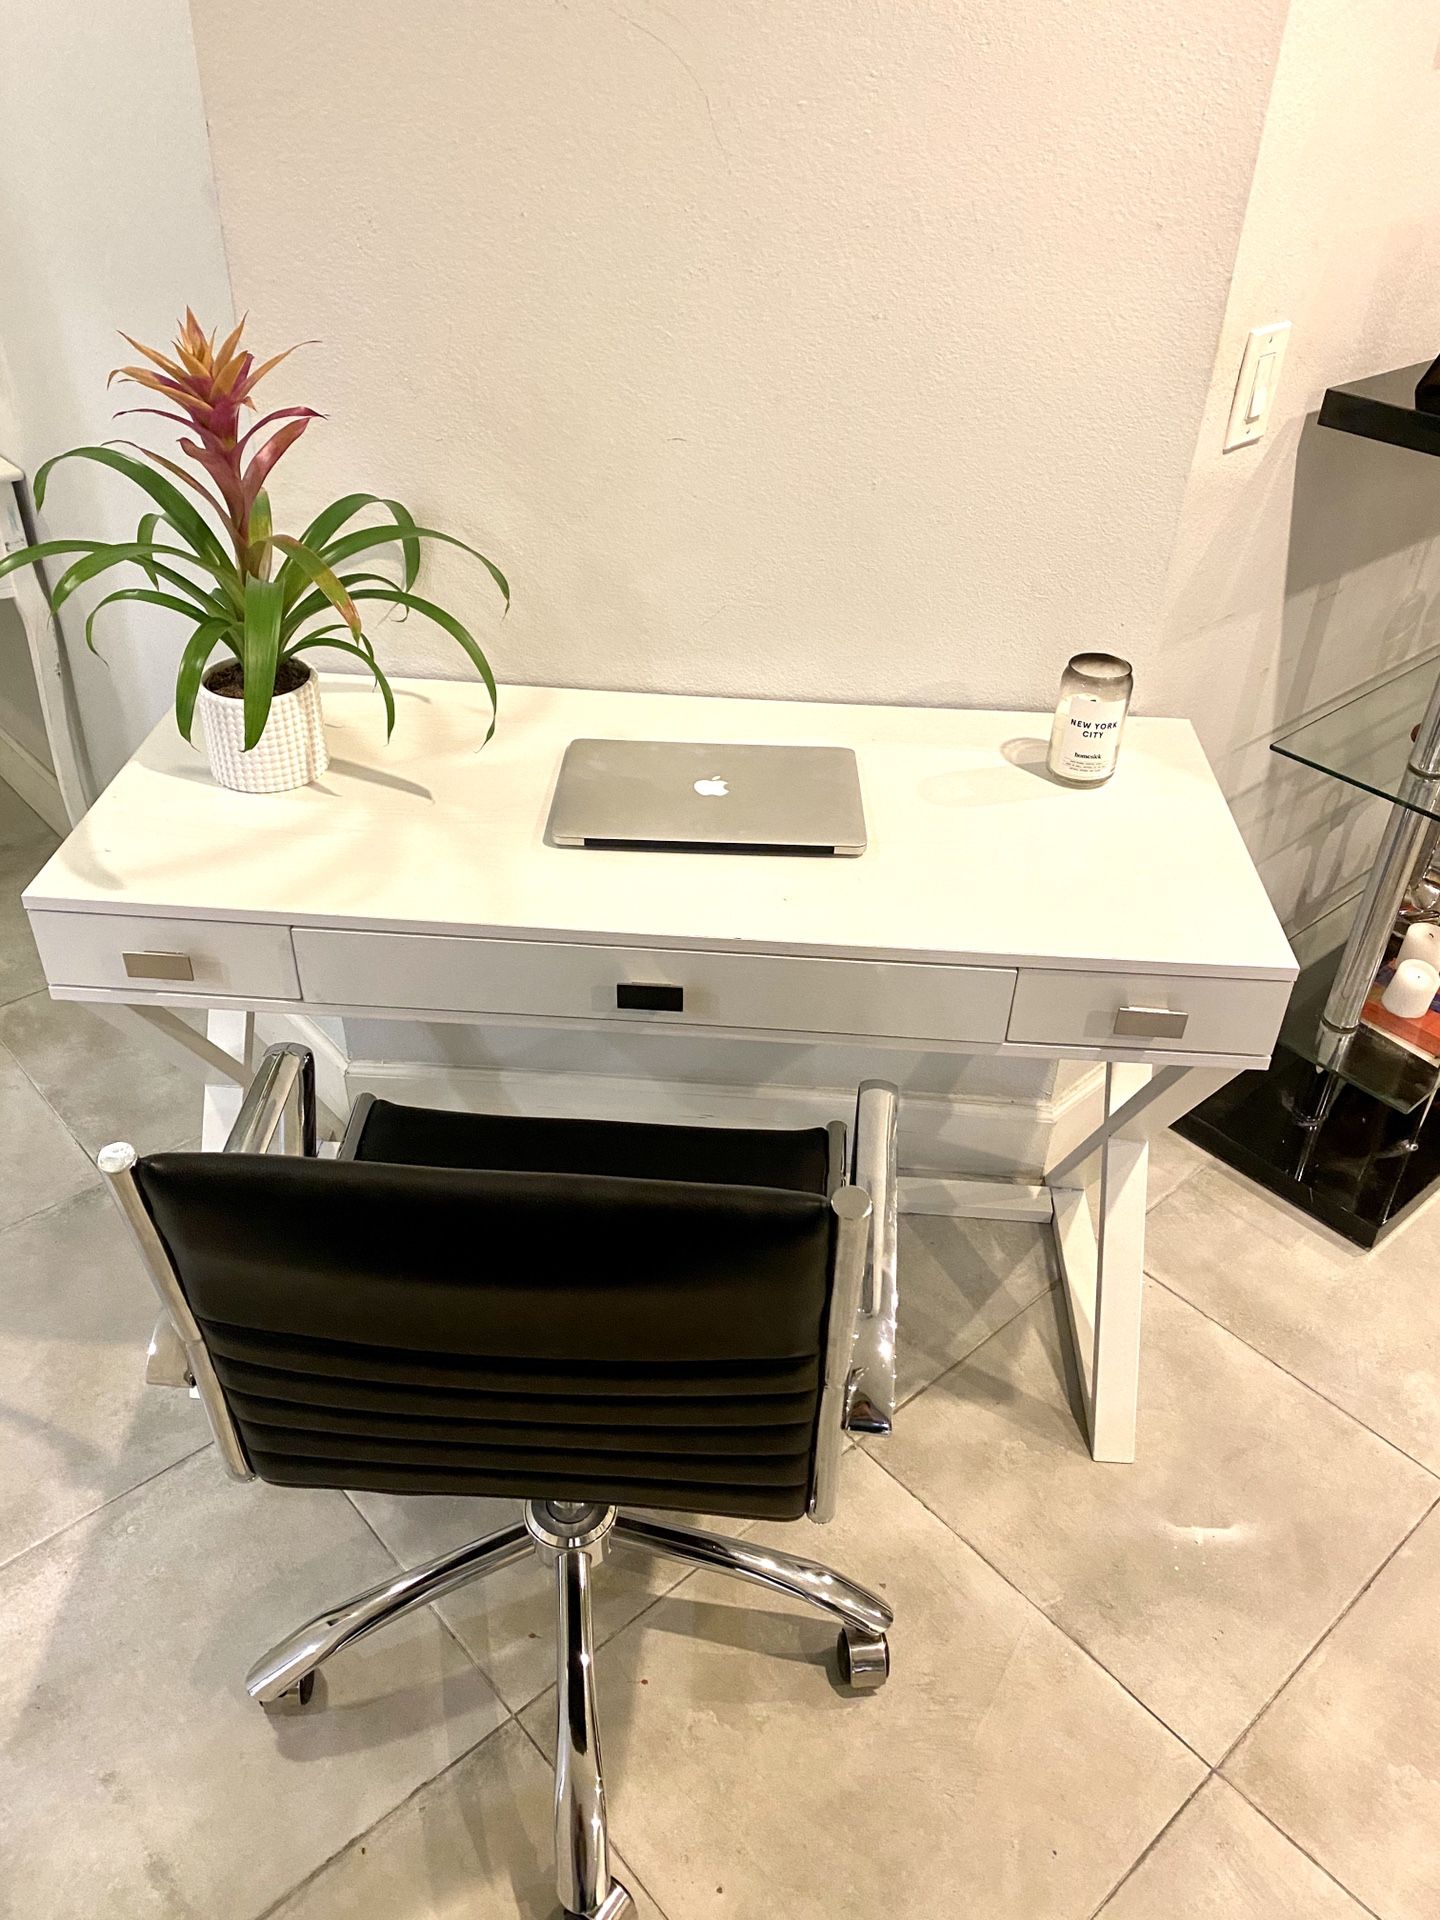 Brand new sleek white modern 3 drawer desk with leather and chrome chair